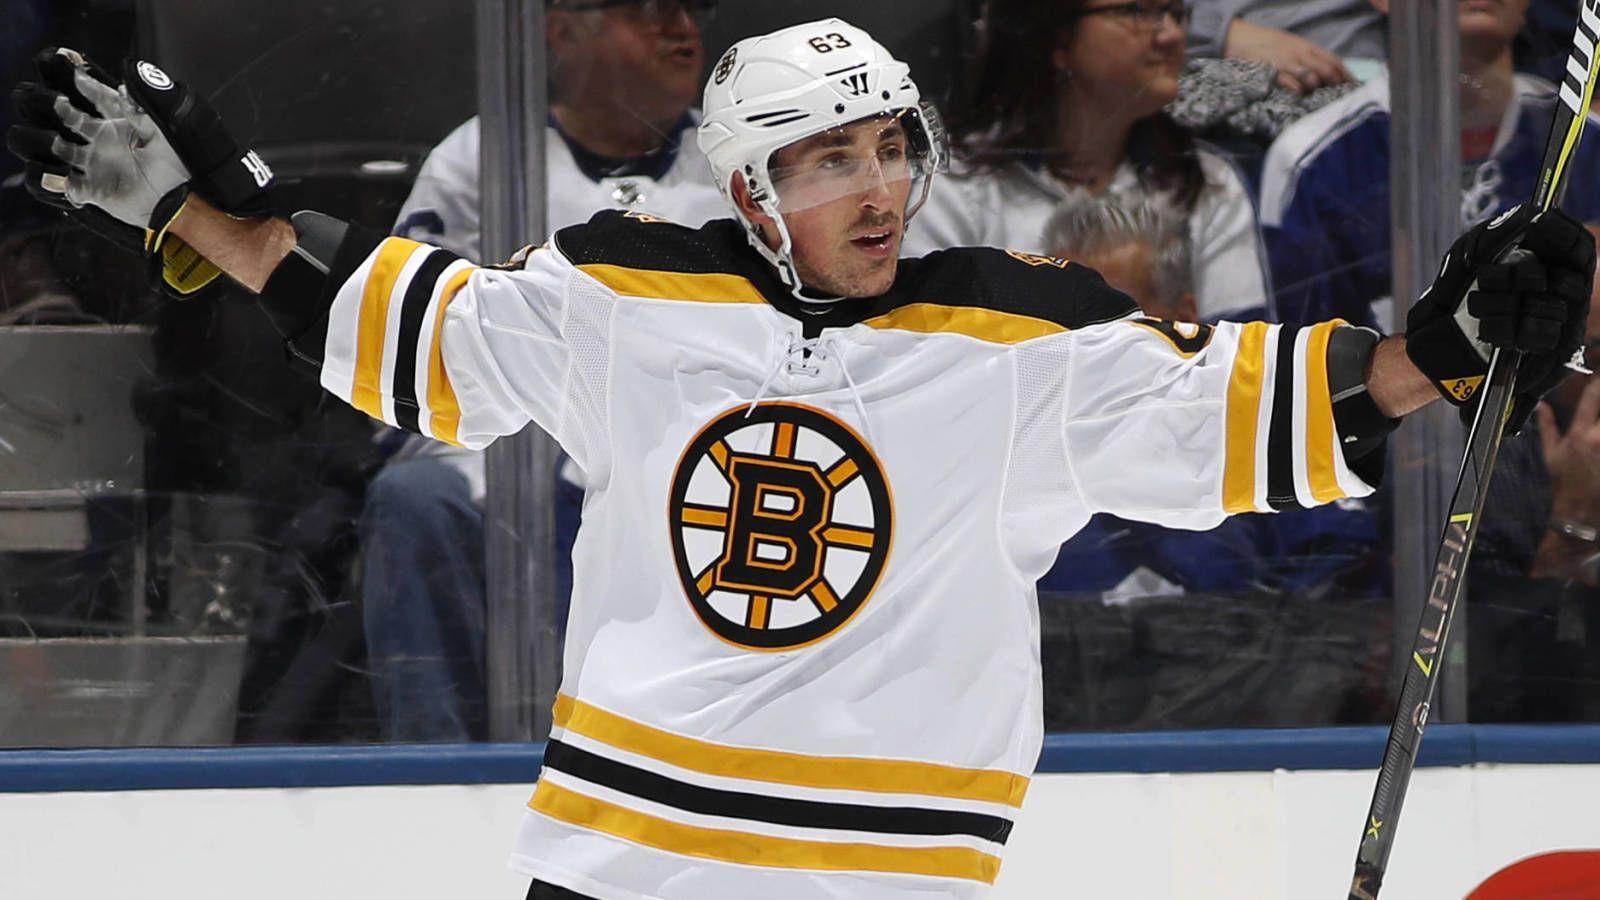 Brad Marchand has the Bruins rolling, whether you like it or not